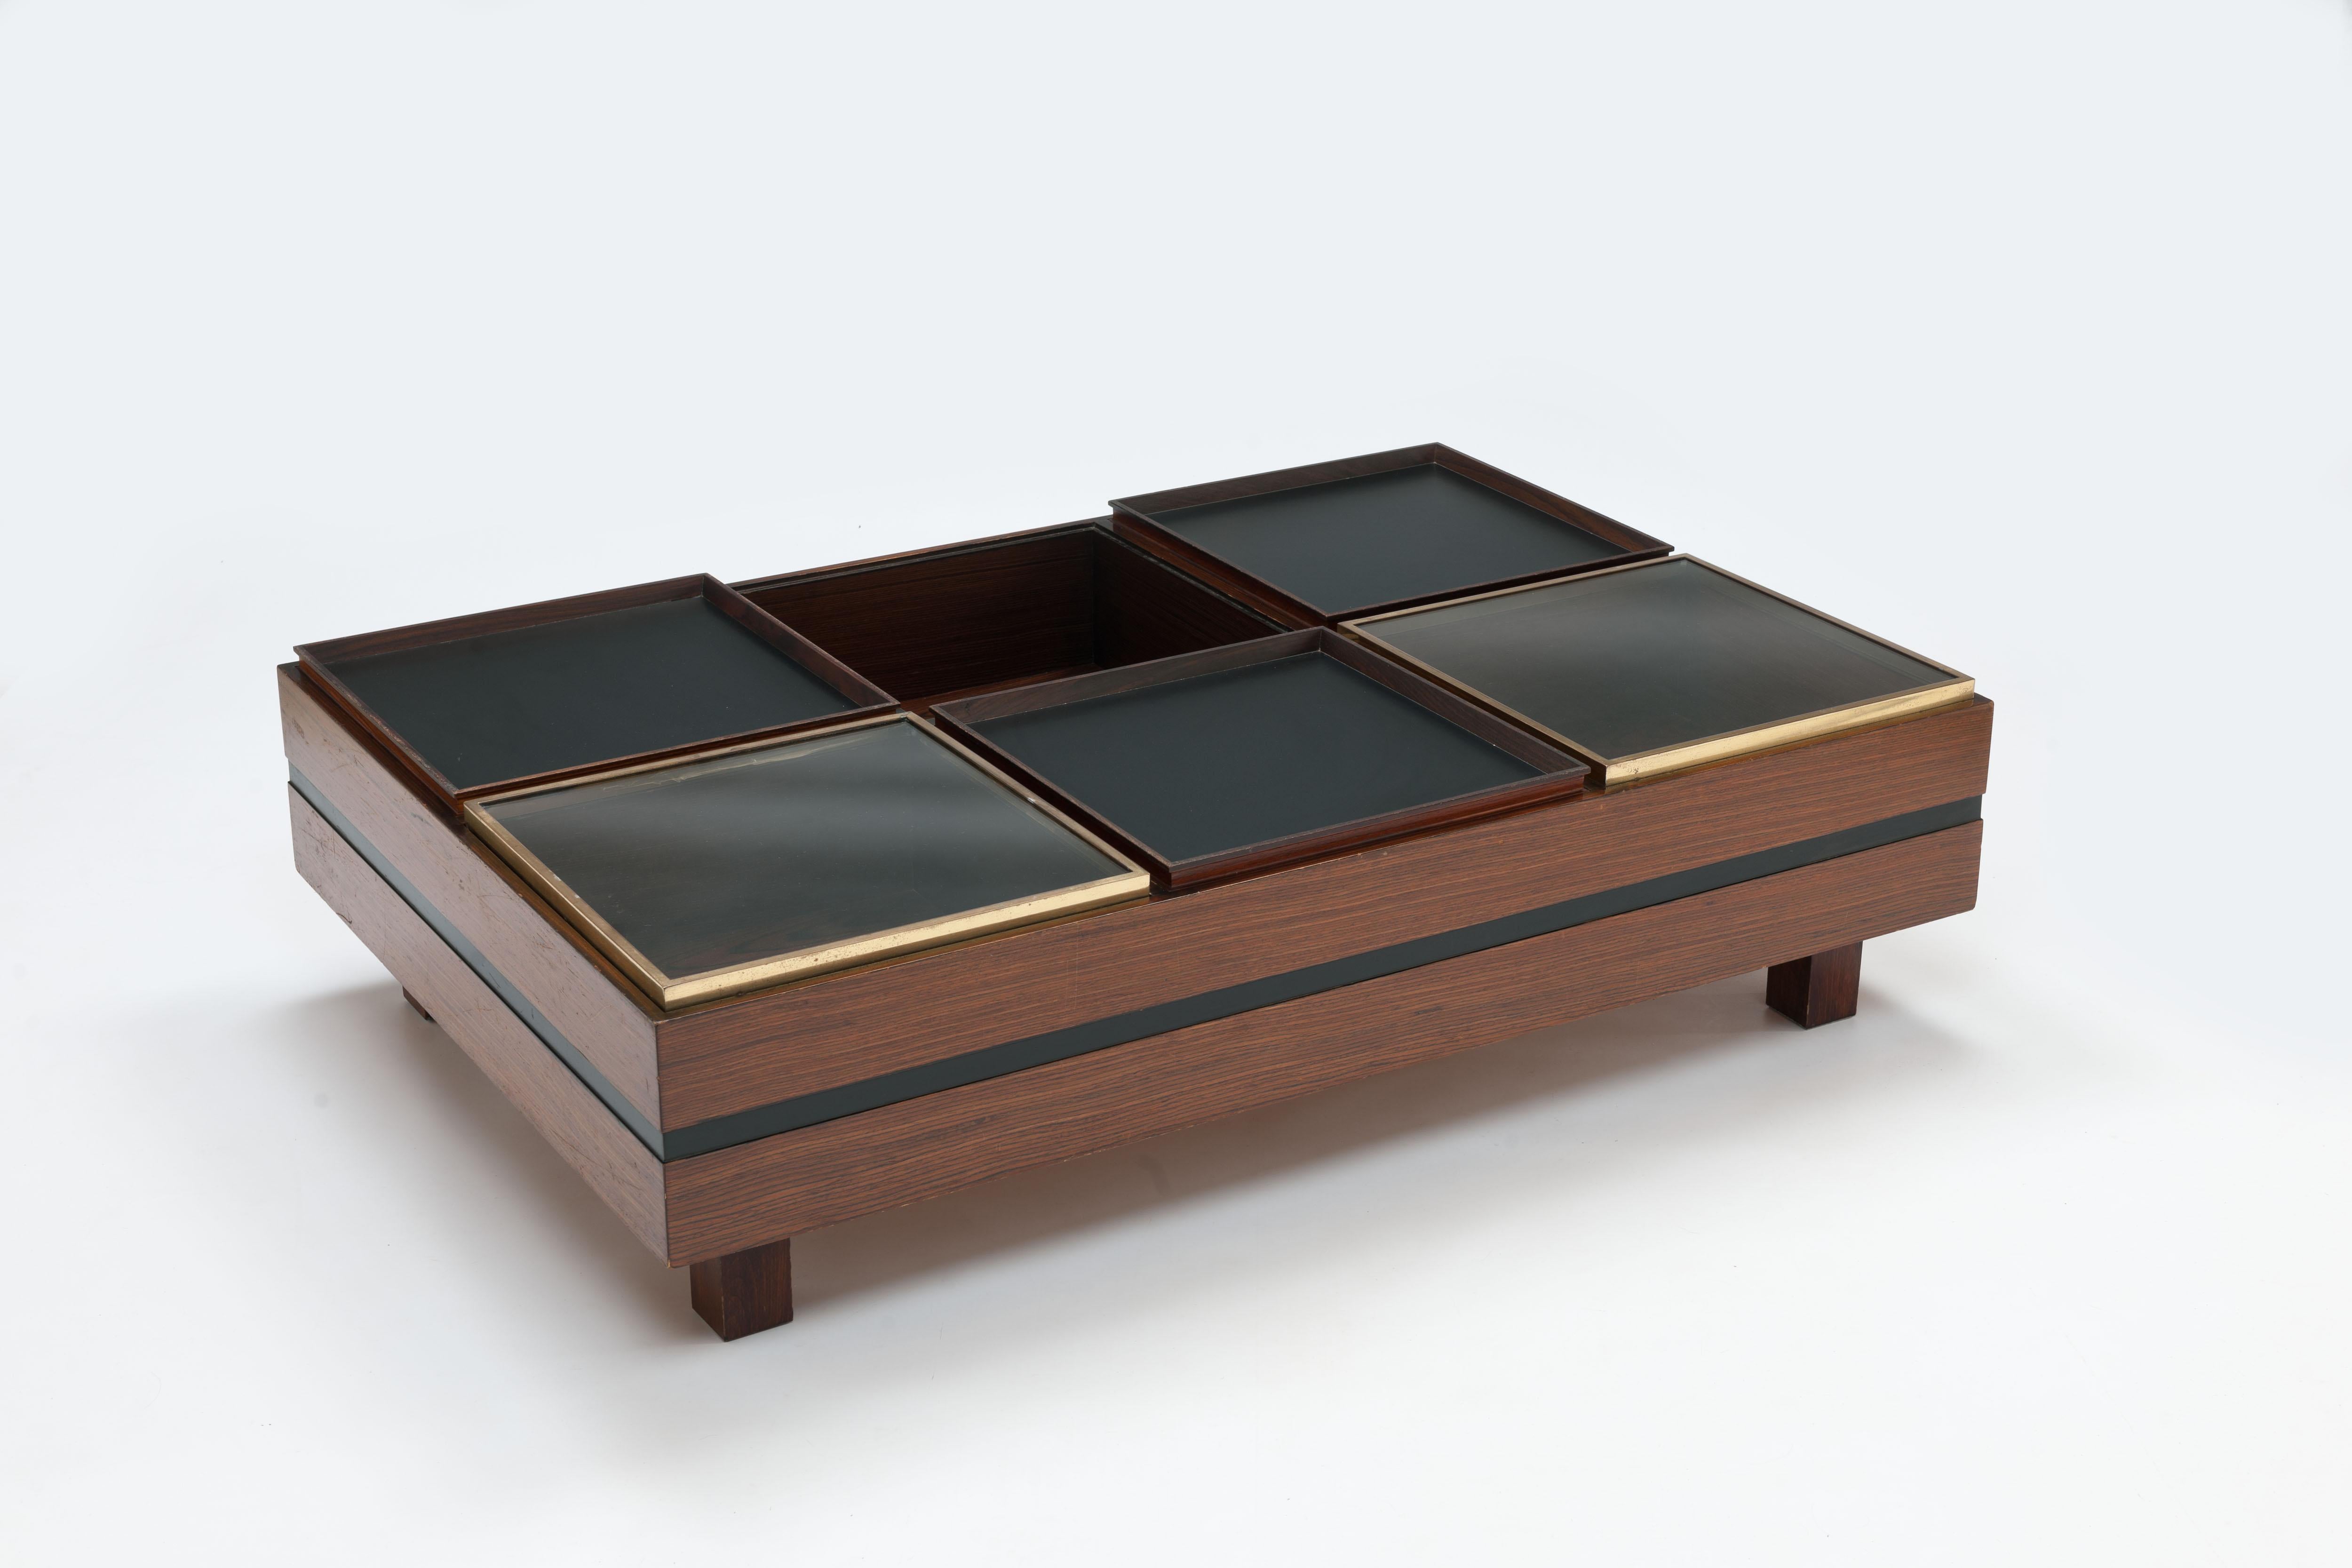 Luigi Sormani (Italy, 1932-2017)), 1960s coffee table divided into six deeper compartments with 5 'lids' and an open compartment. 
These 'lids' are three reversible trays - one side of wood, the other side of black laminate - and two transparent